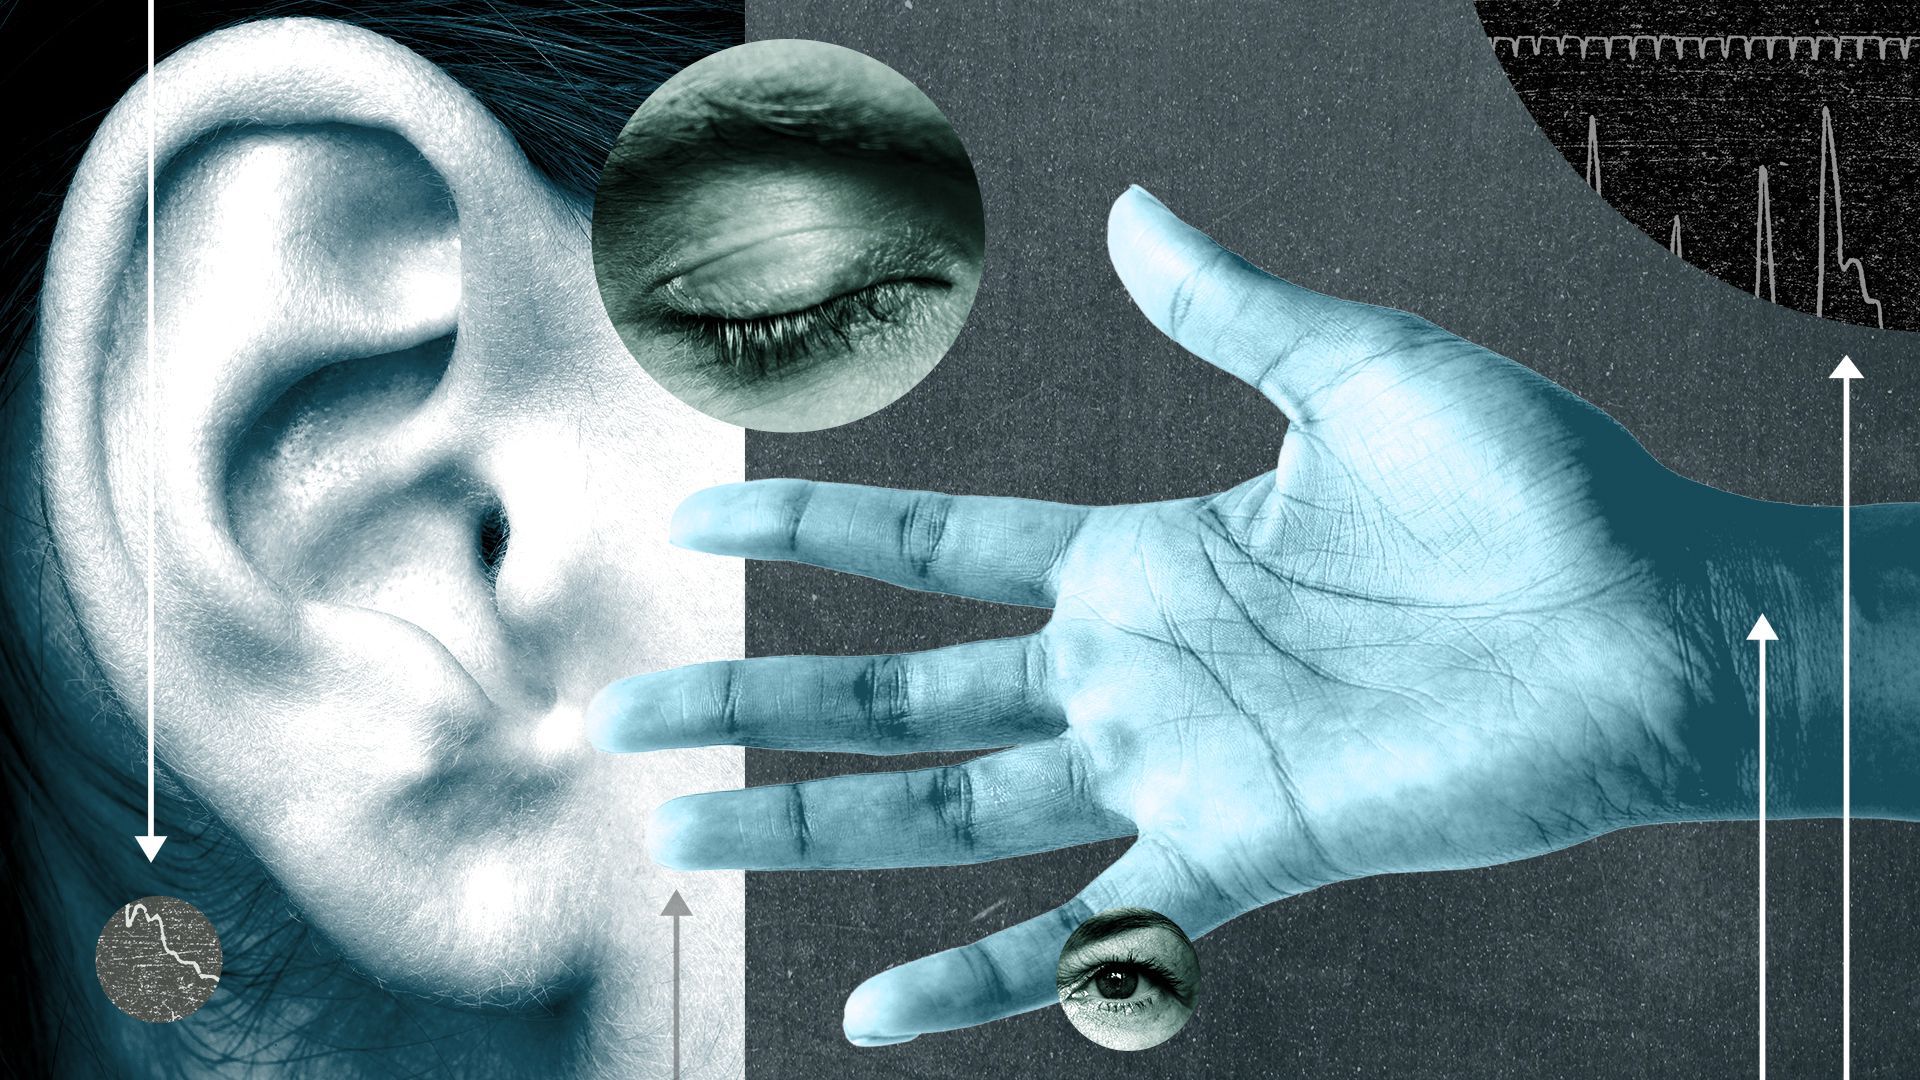  Illustrated collage of an outstretched hand, eyes, pulse rates and an ear.